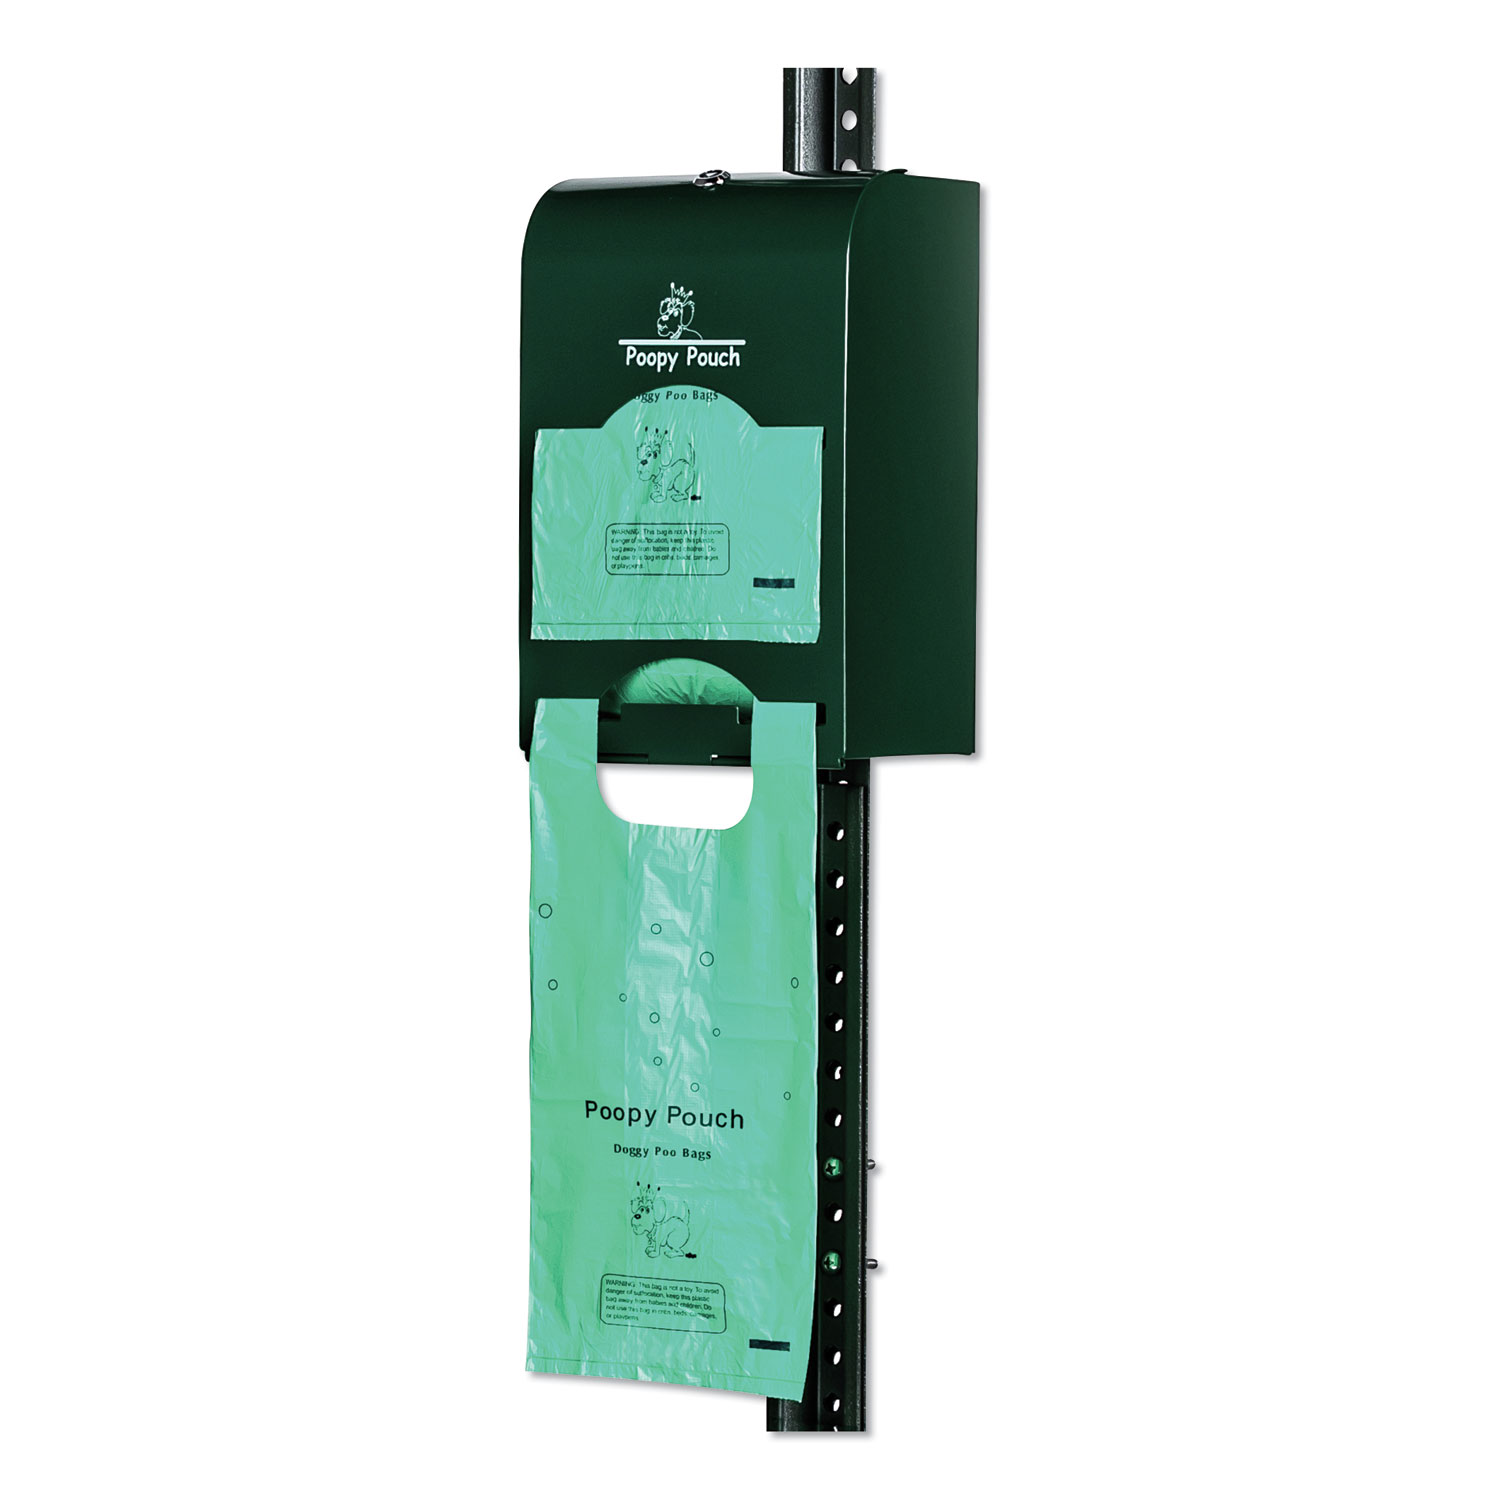  Poopy Pouch PP-DSP-2R400 Imperial Pet Waste Bag Dispenser, Holds 800 Poopy Pouch Tie Handle Pet Waste Bags, Hunter Green (CWDPPDSP2R400) 